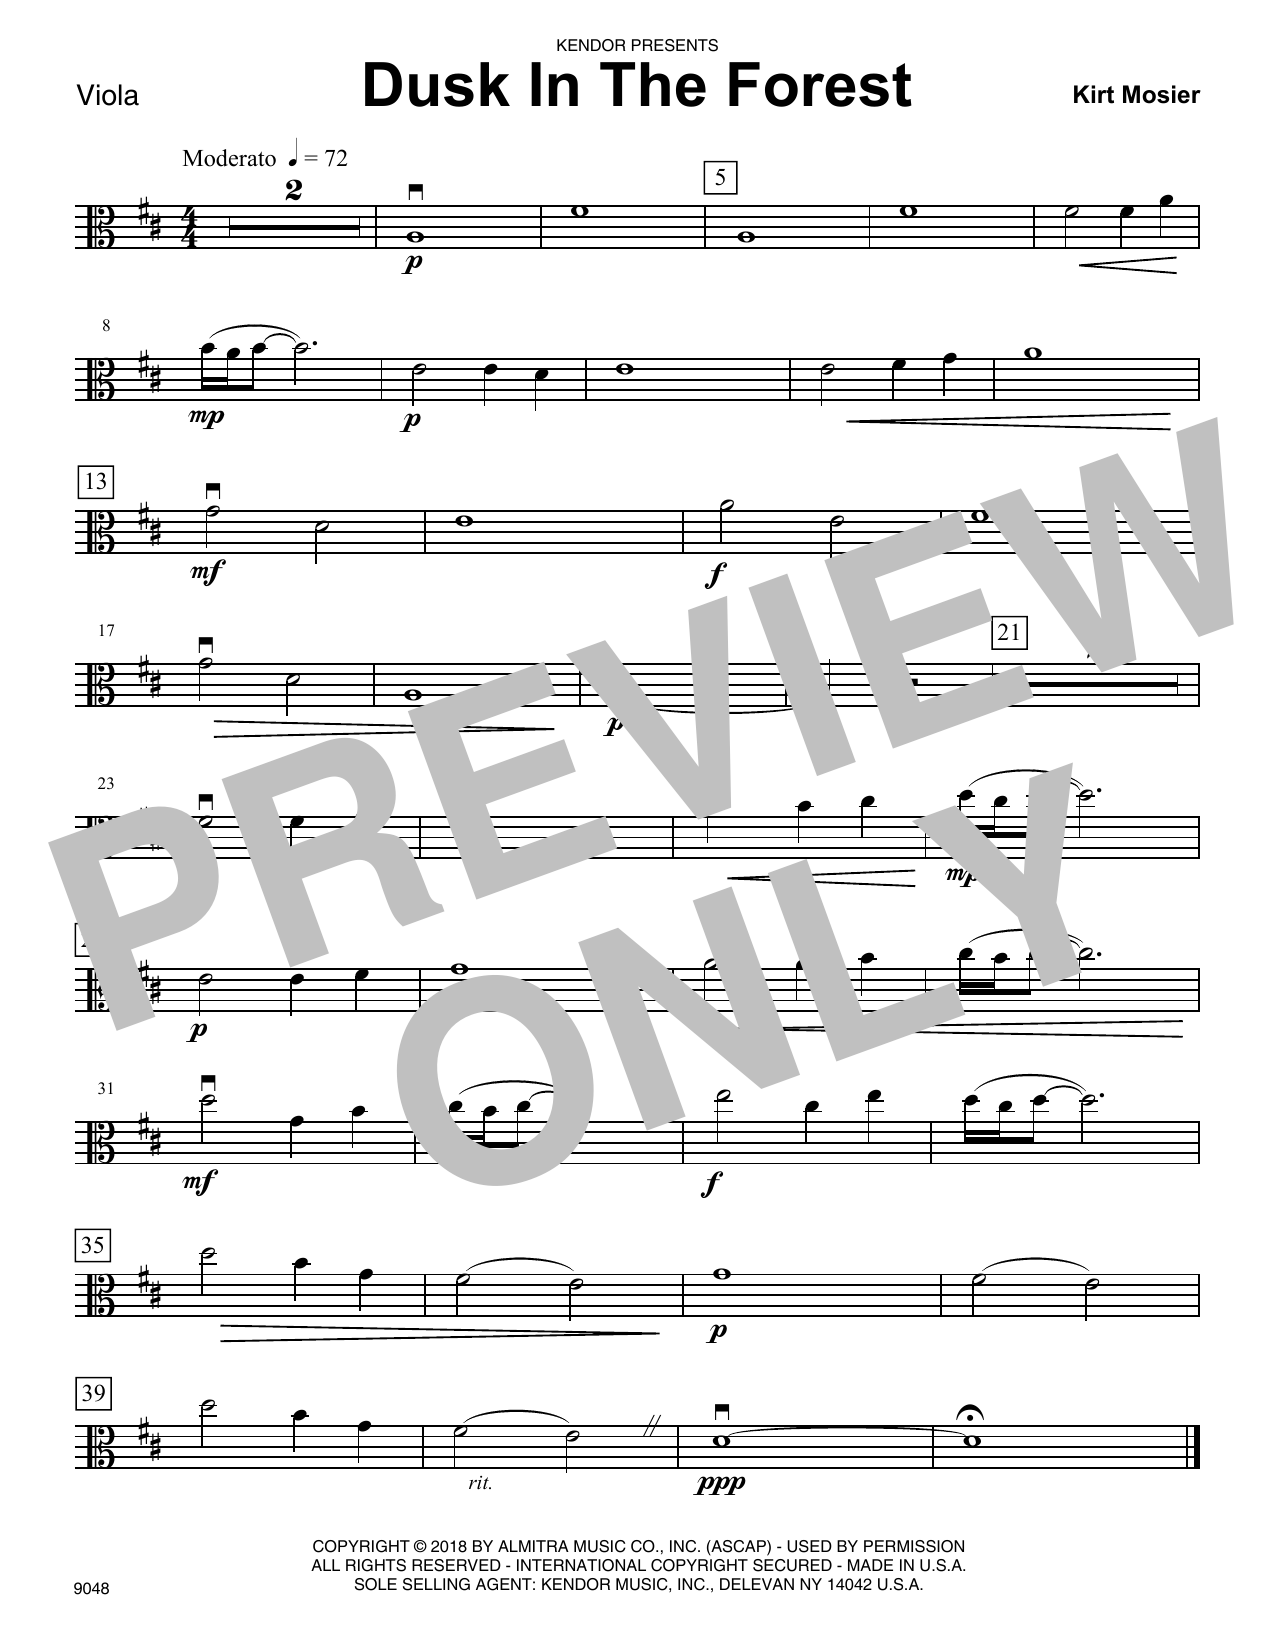 Download Kirt Mosier Dusk In The Forest - Viola Sheet Music